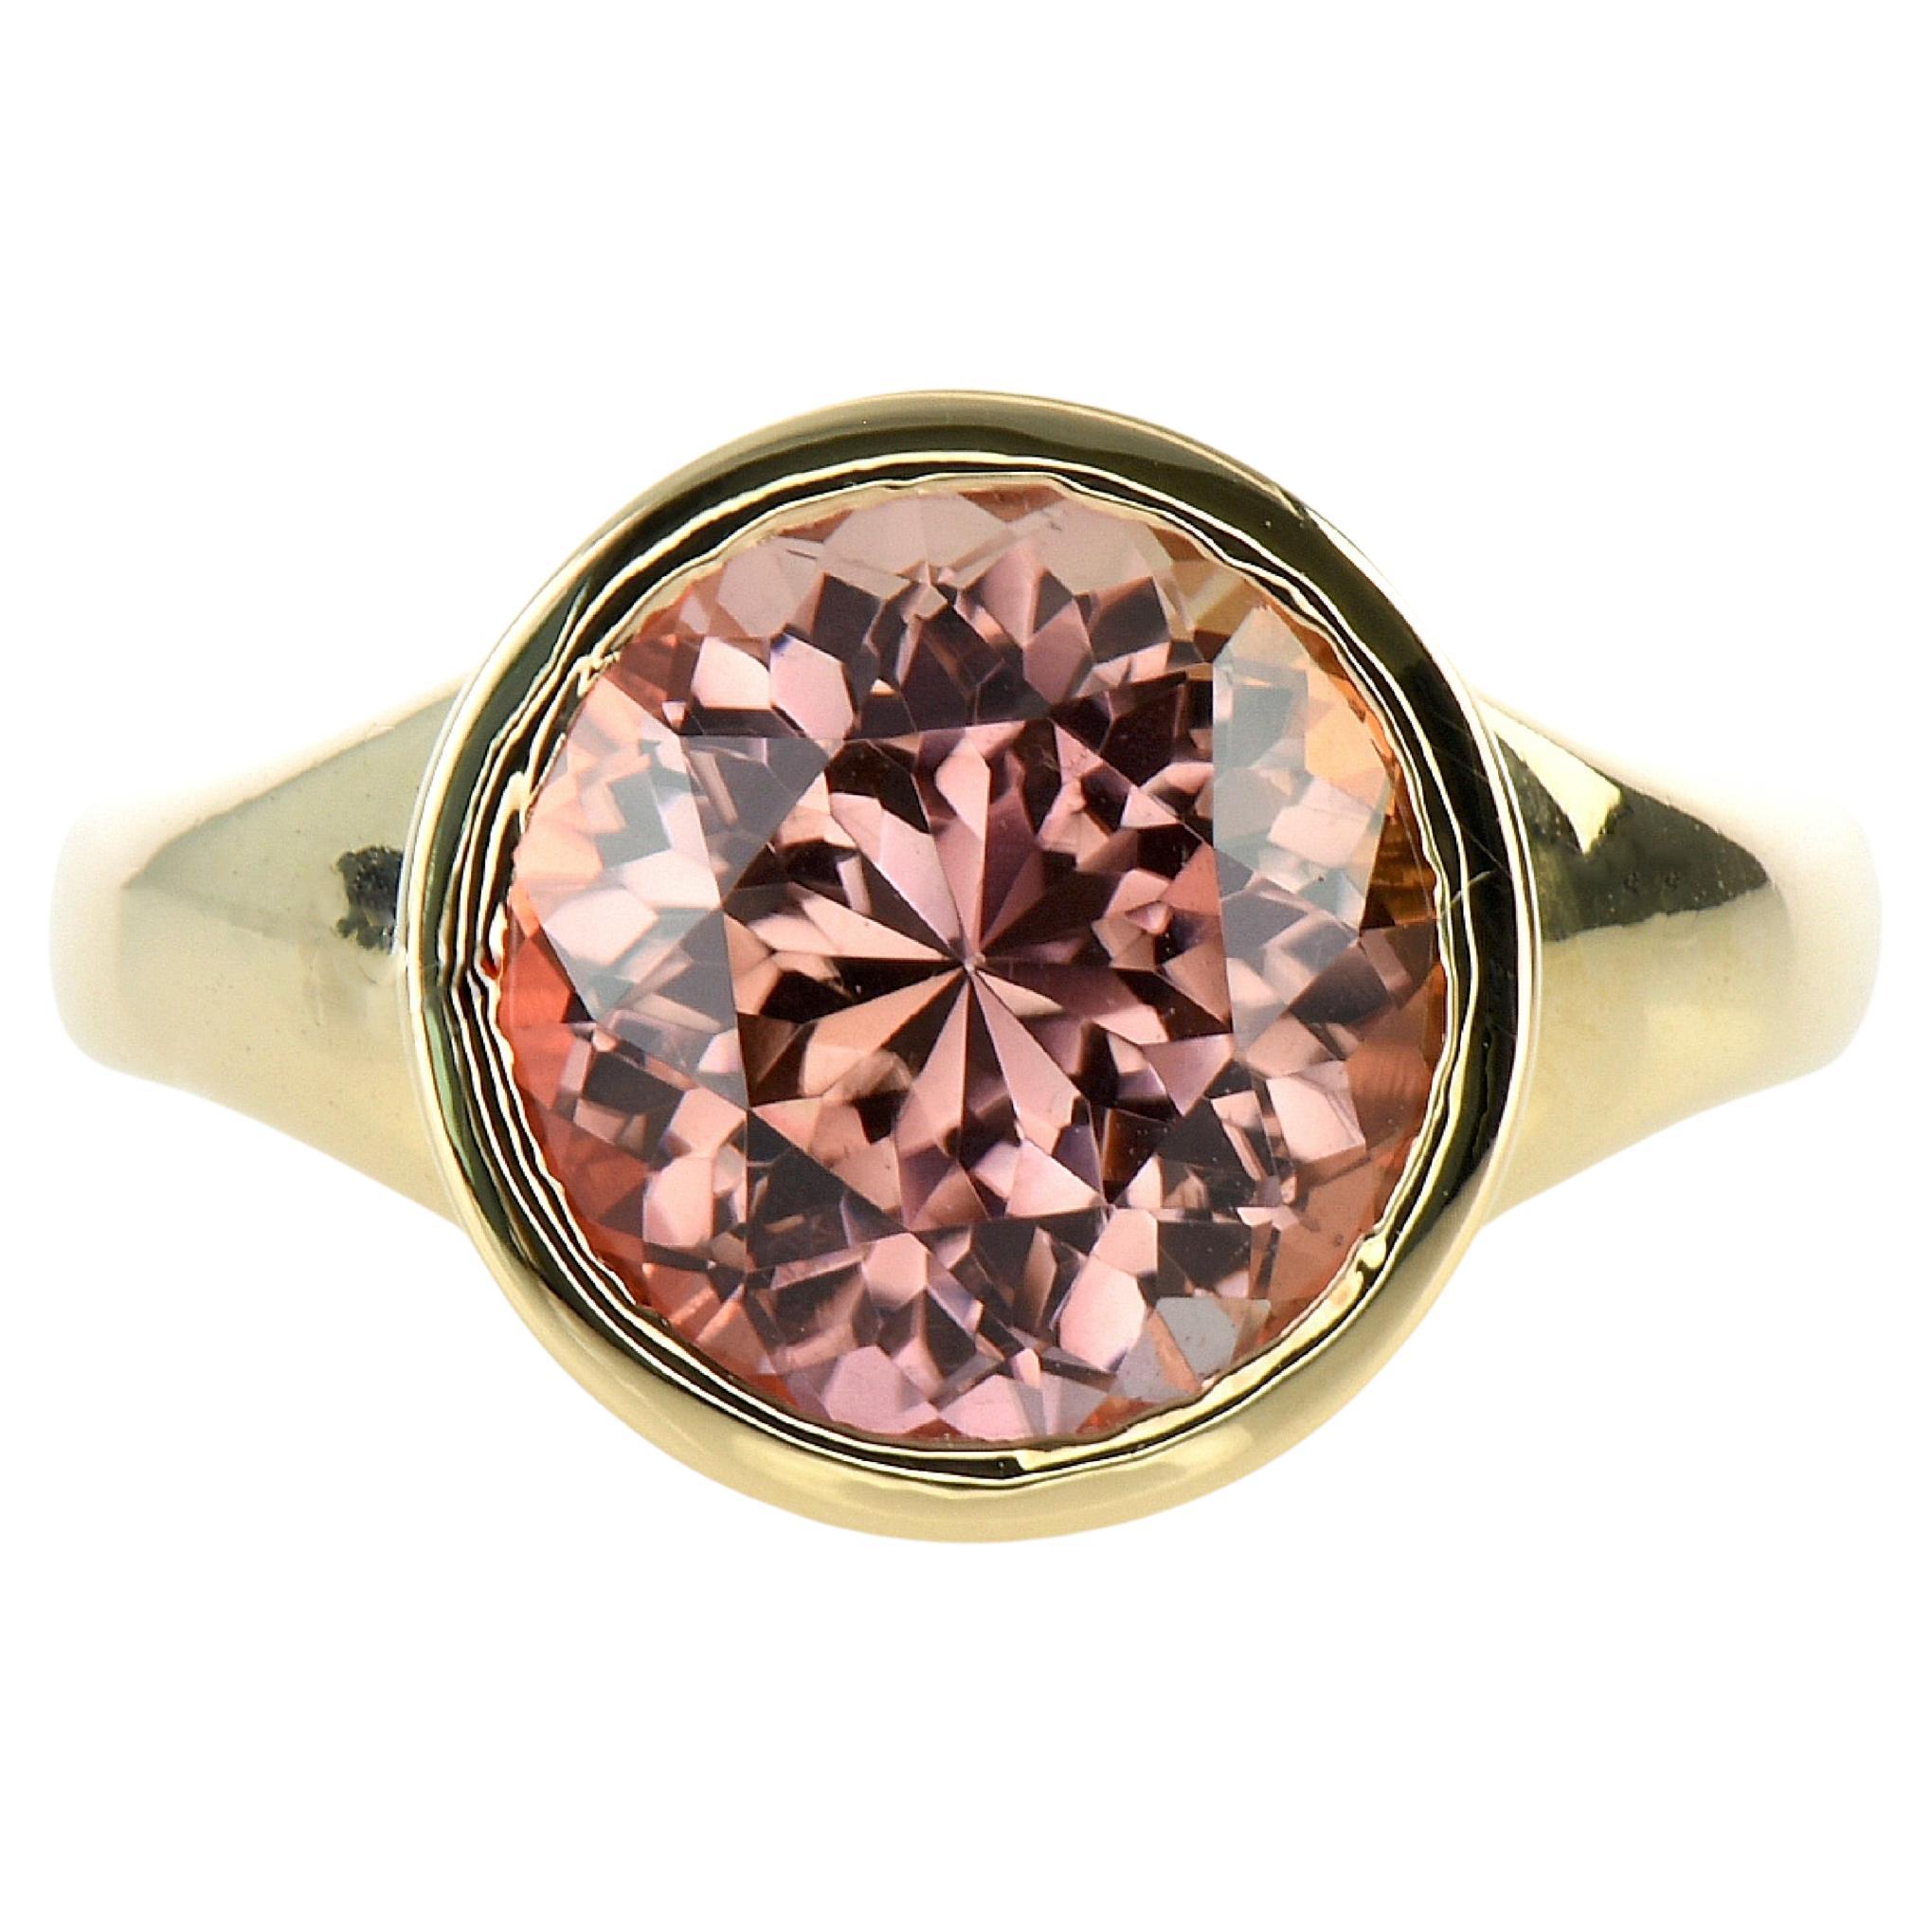 5.1ct Orange Tourmaline Bezel Ring-Round Cut-18KT Yellow Gold-GIA Certified-Rare For Sale